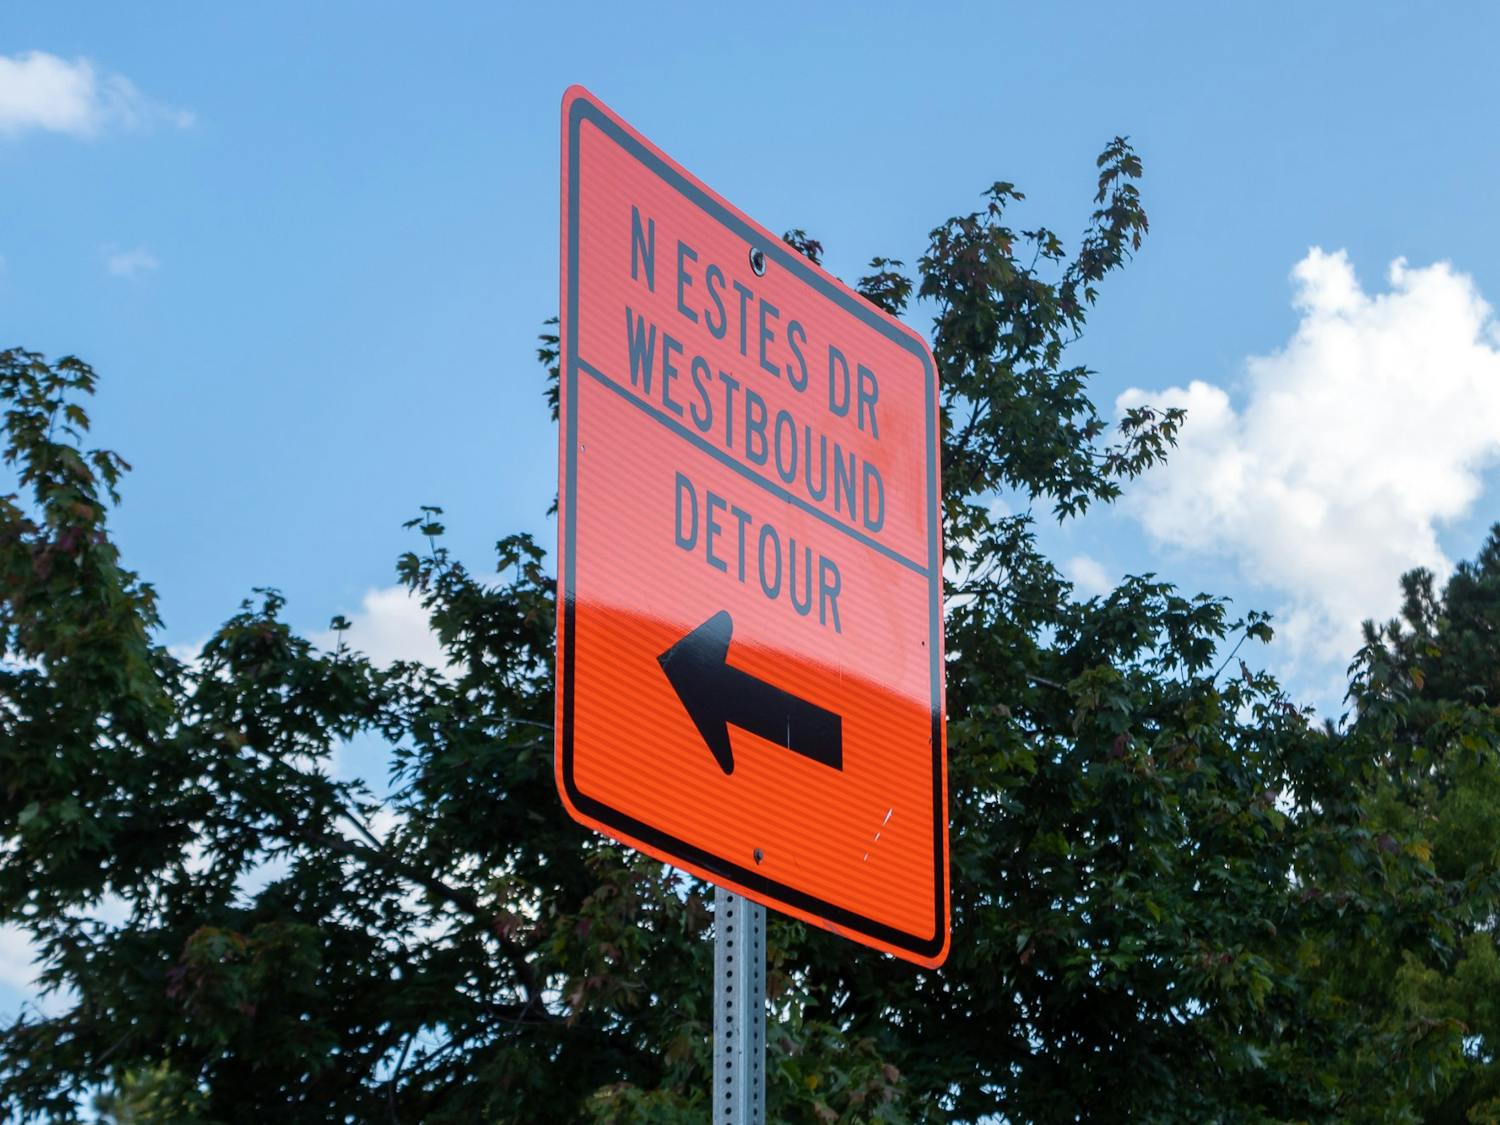 A road sign indicating the detour route on W. Estes Drive, pictured on Tuesday, Sept. 20, 2022.